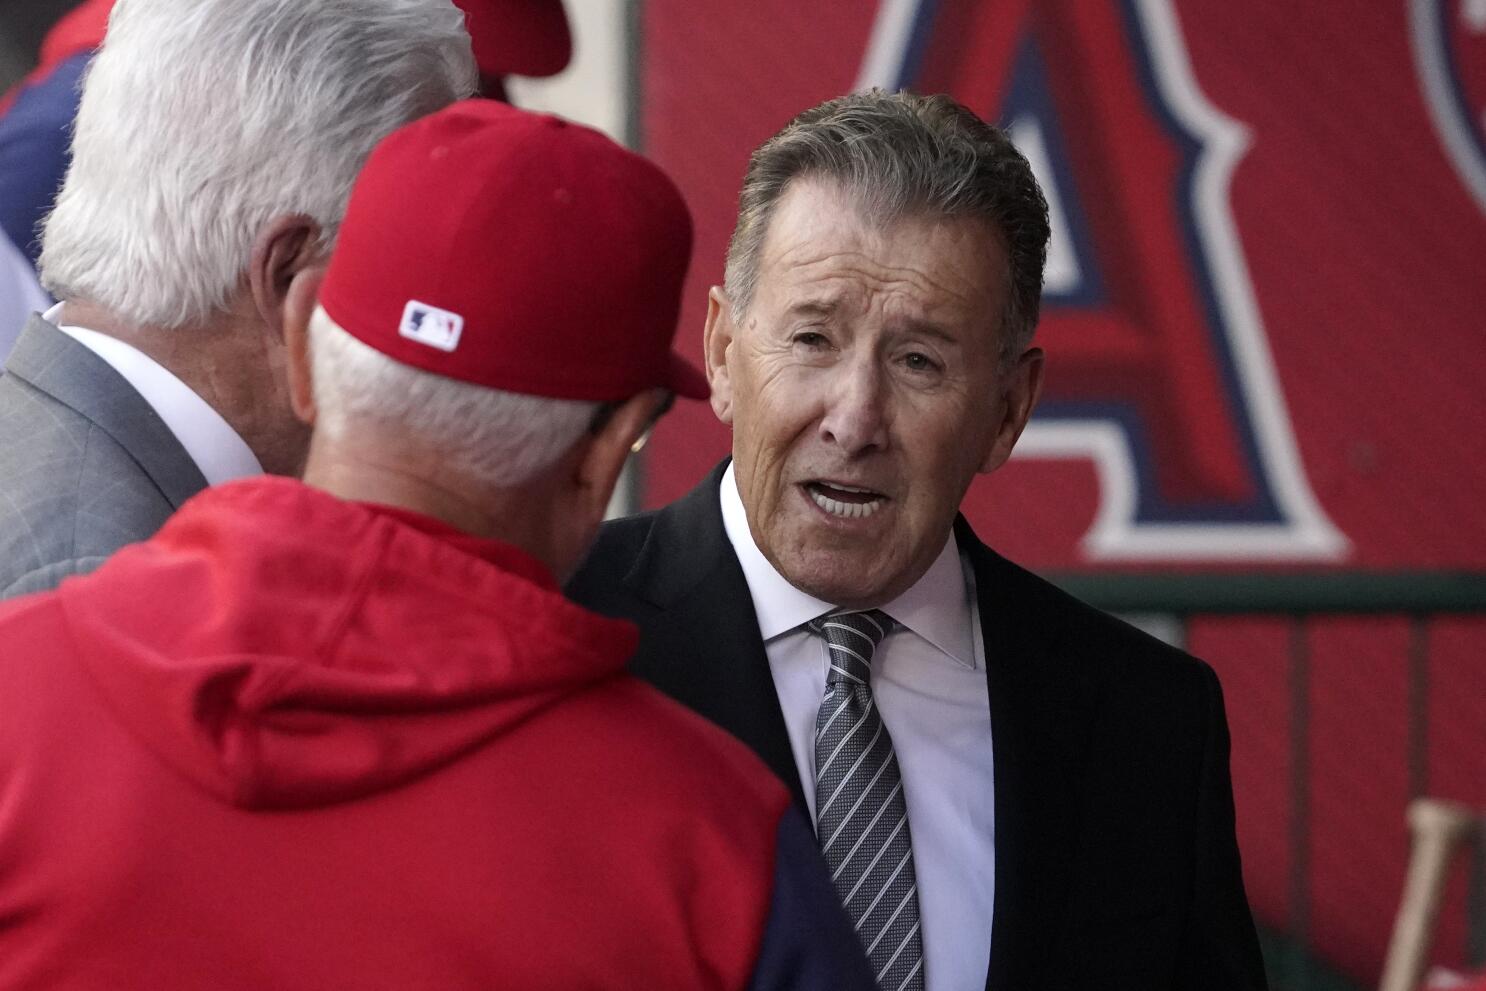 Washington Nationals: An Update on the Potential Sale of the Franchise